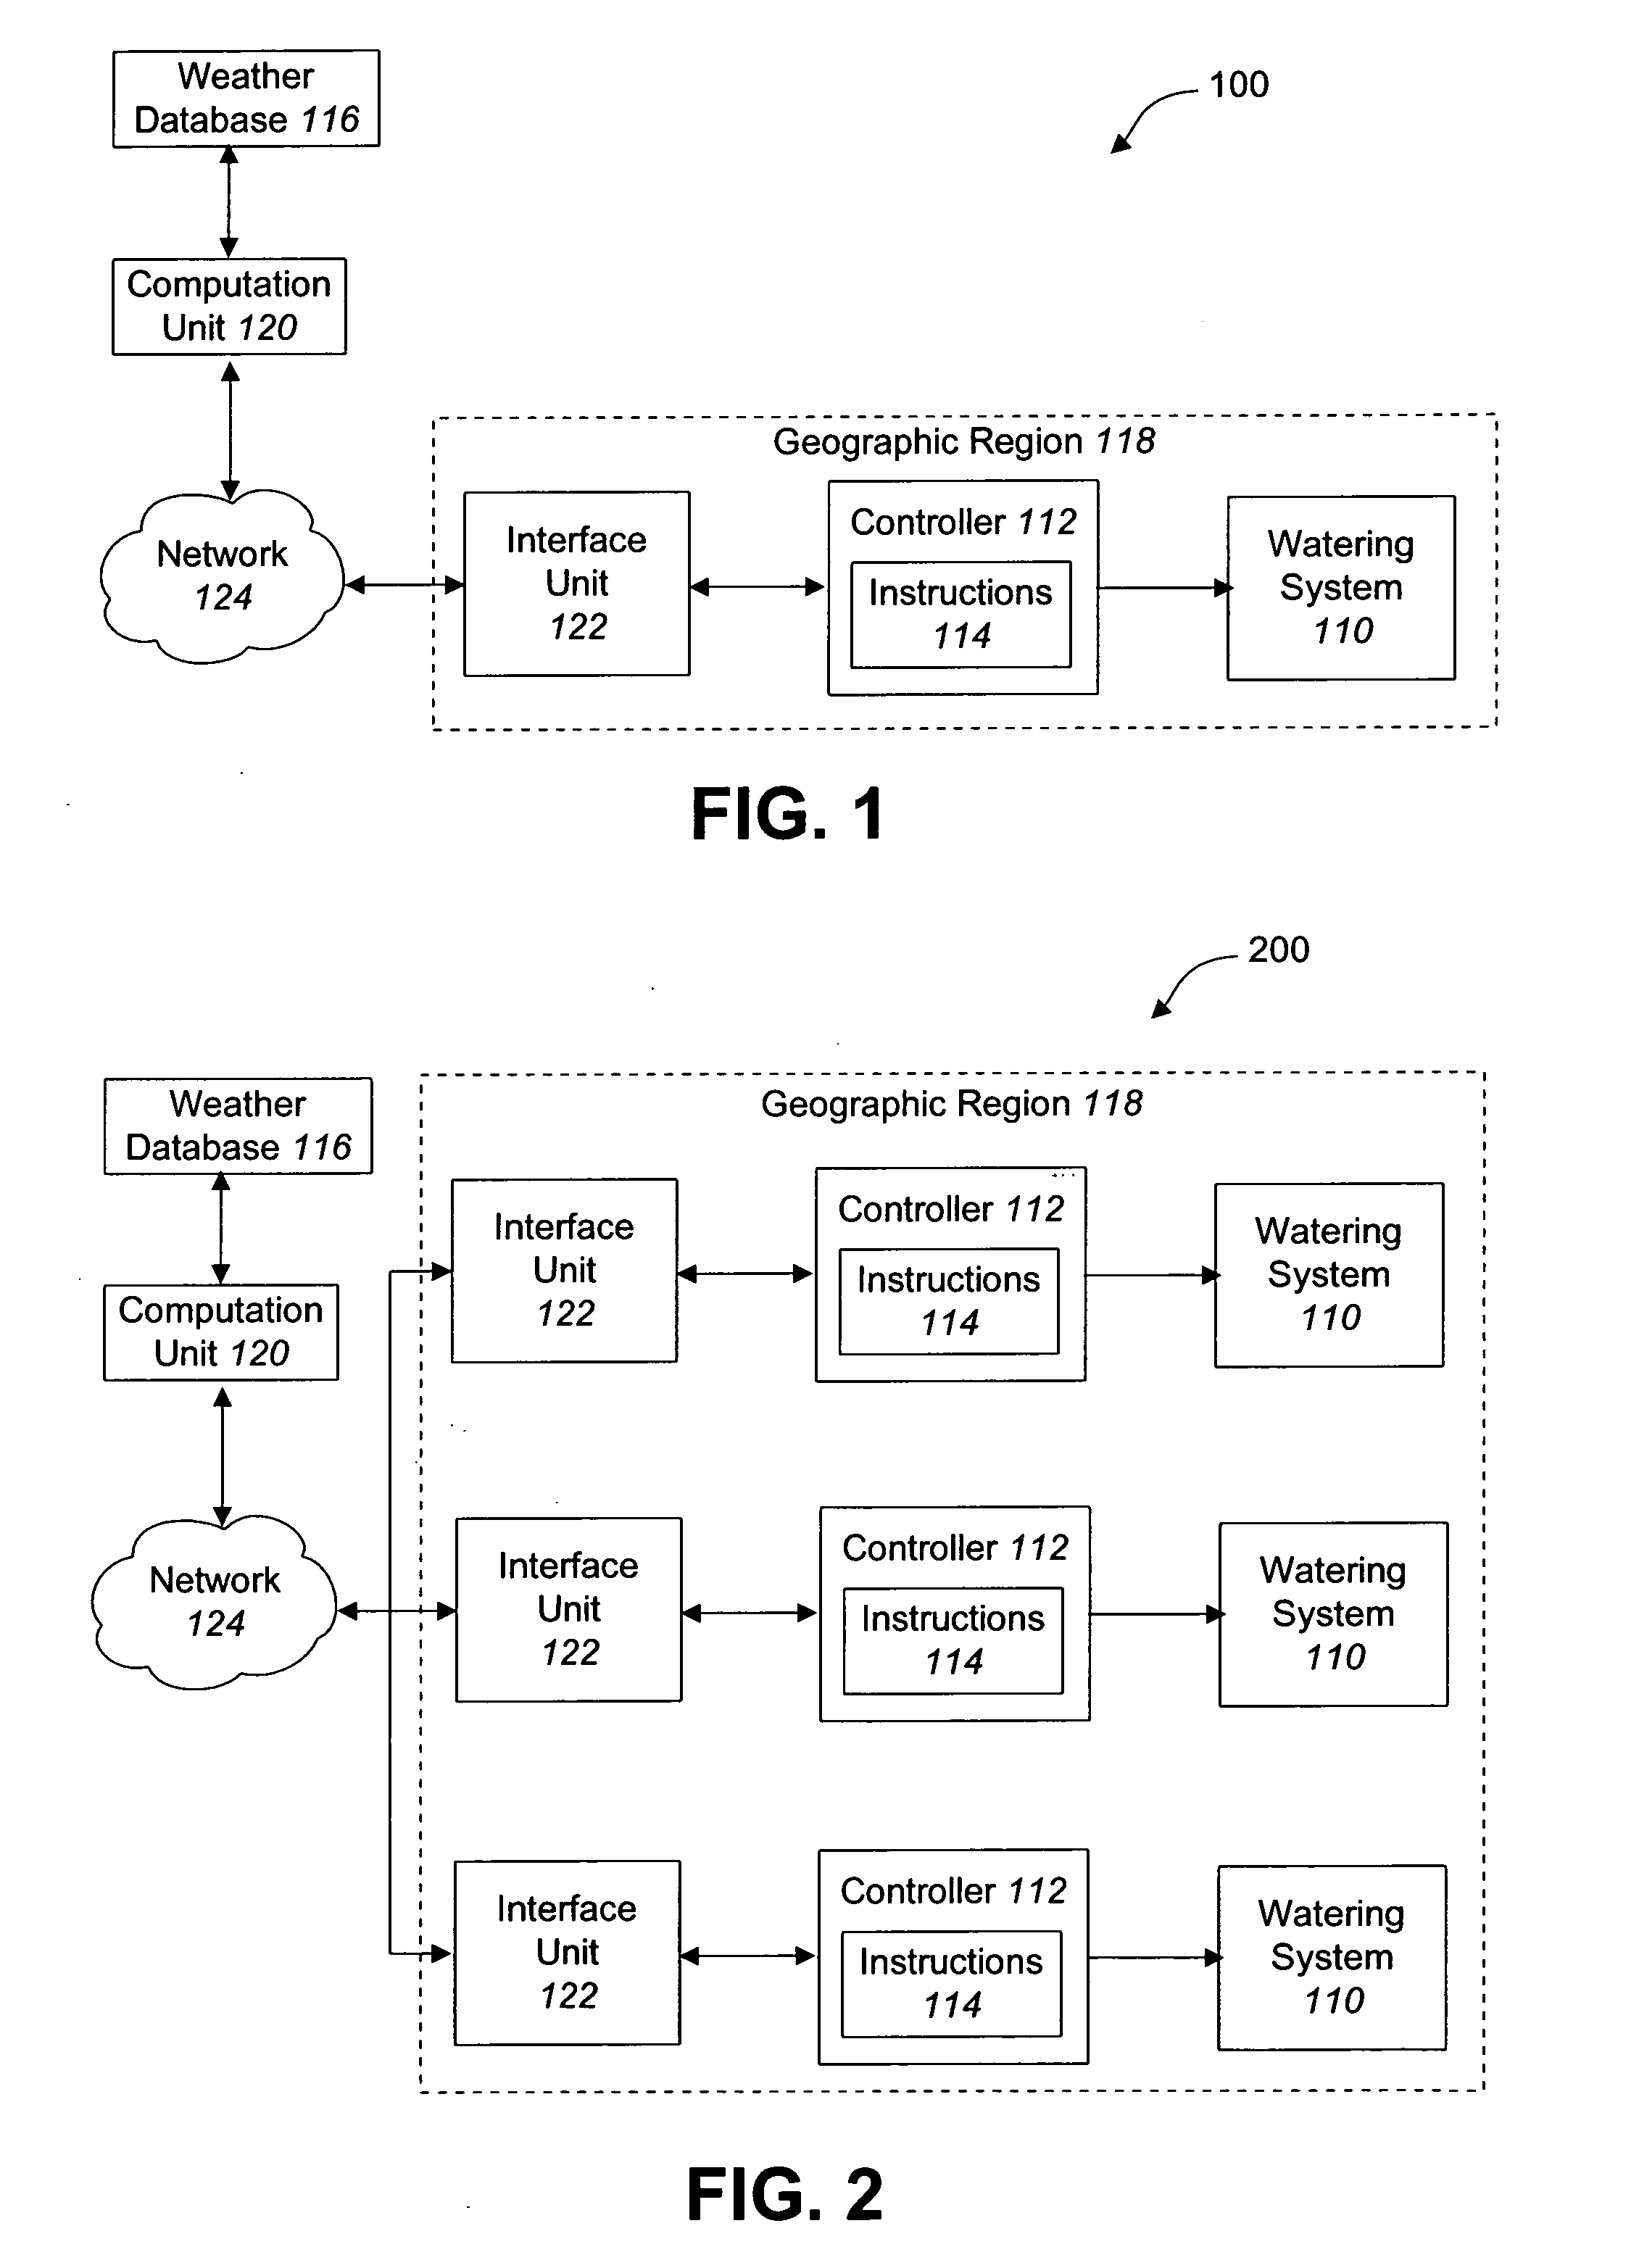 Systems and methods for optimizing the efficiency of a watering system through use of a radio data system